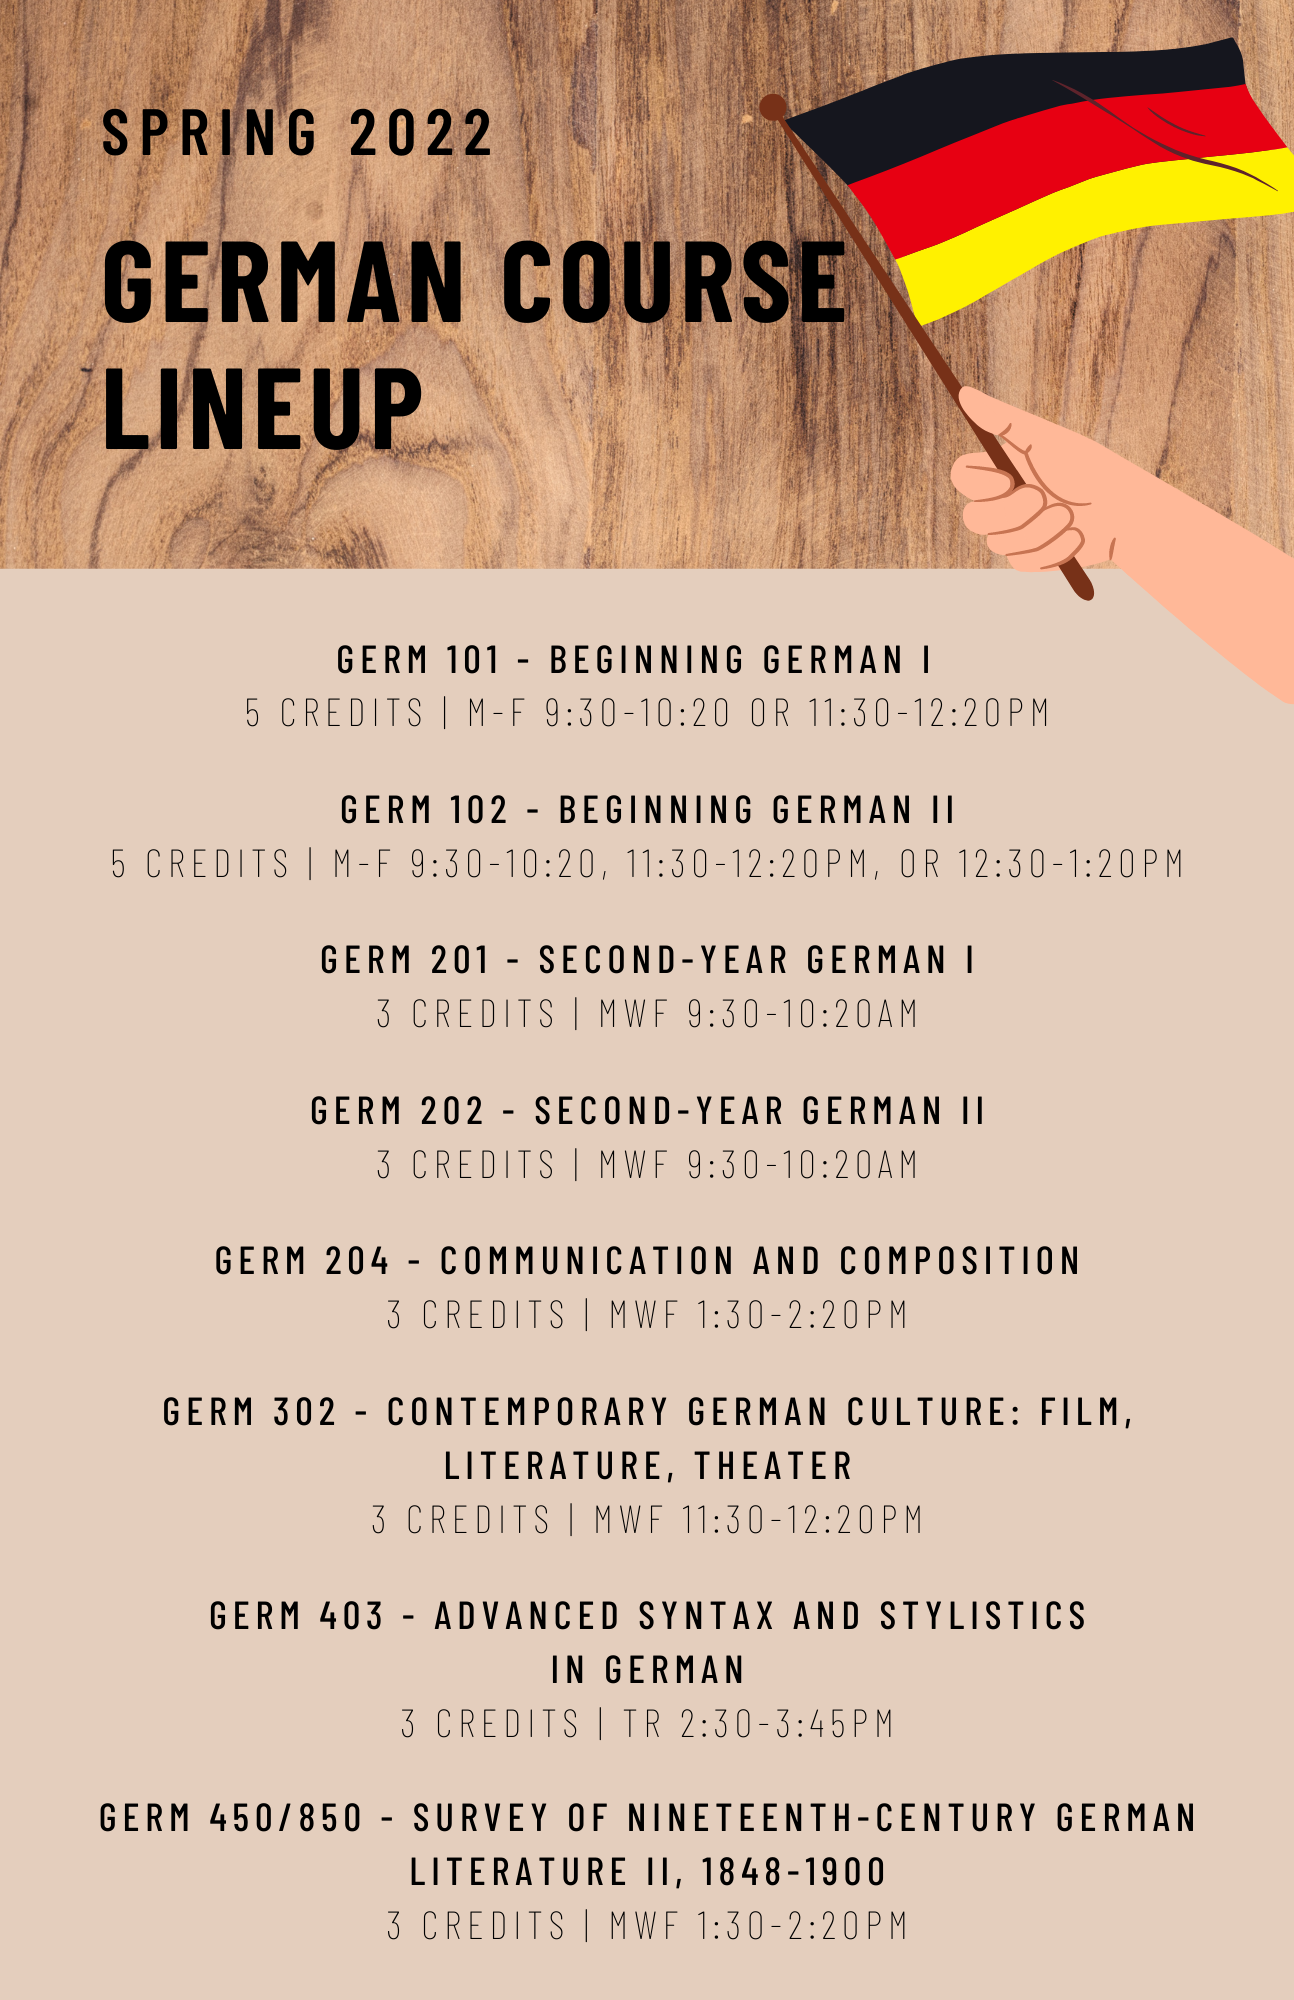 Spring 2022 German Course Lineup